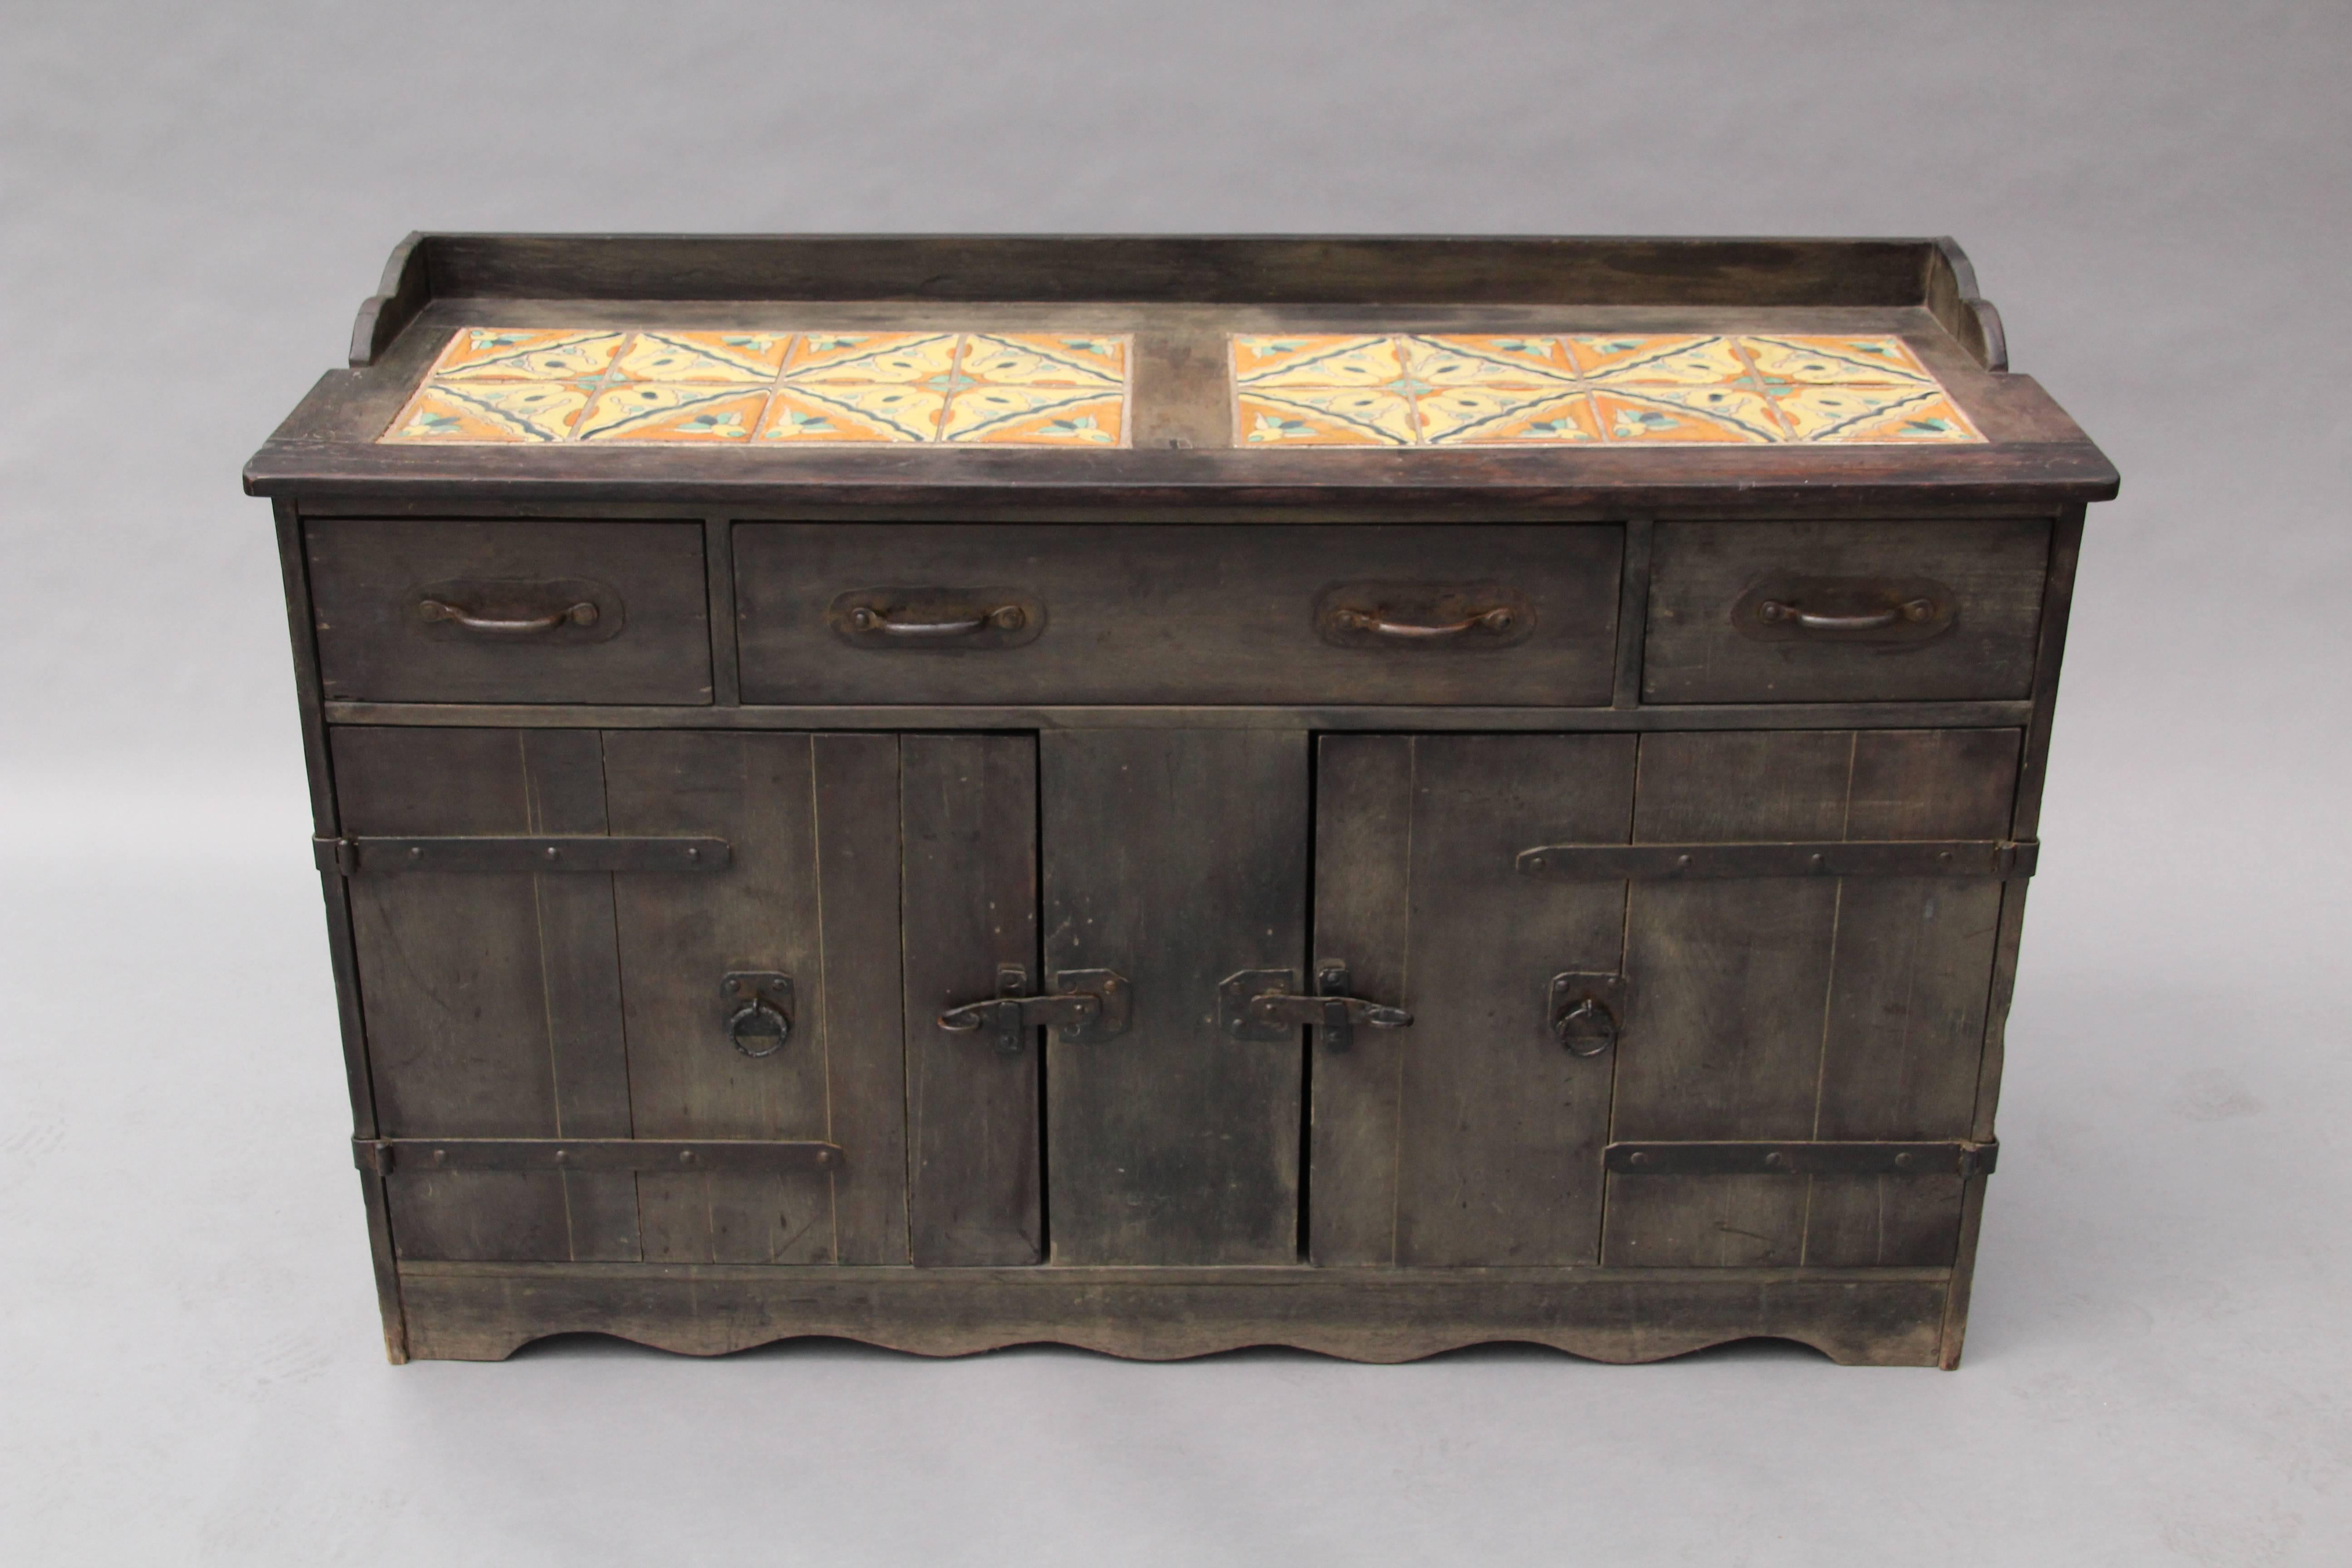 Mid-20th Century Spanish Revival California Rare Old Wood Monterey Sideboard with 12 Tile Top